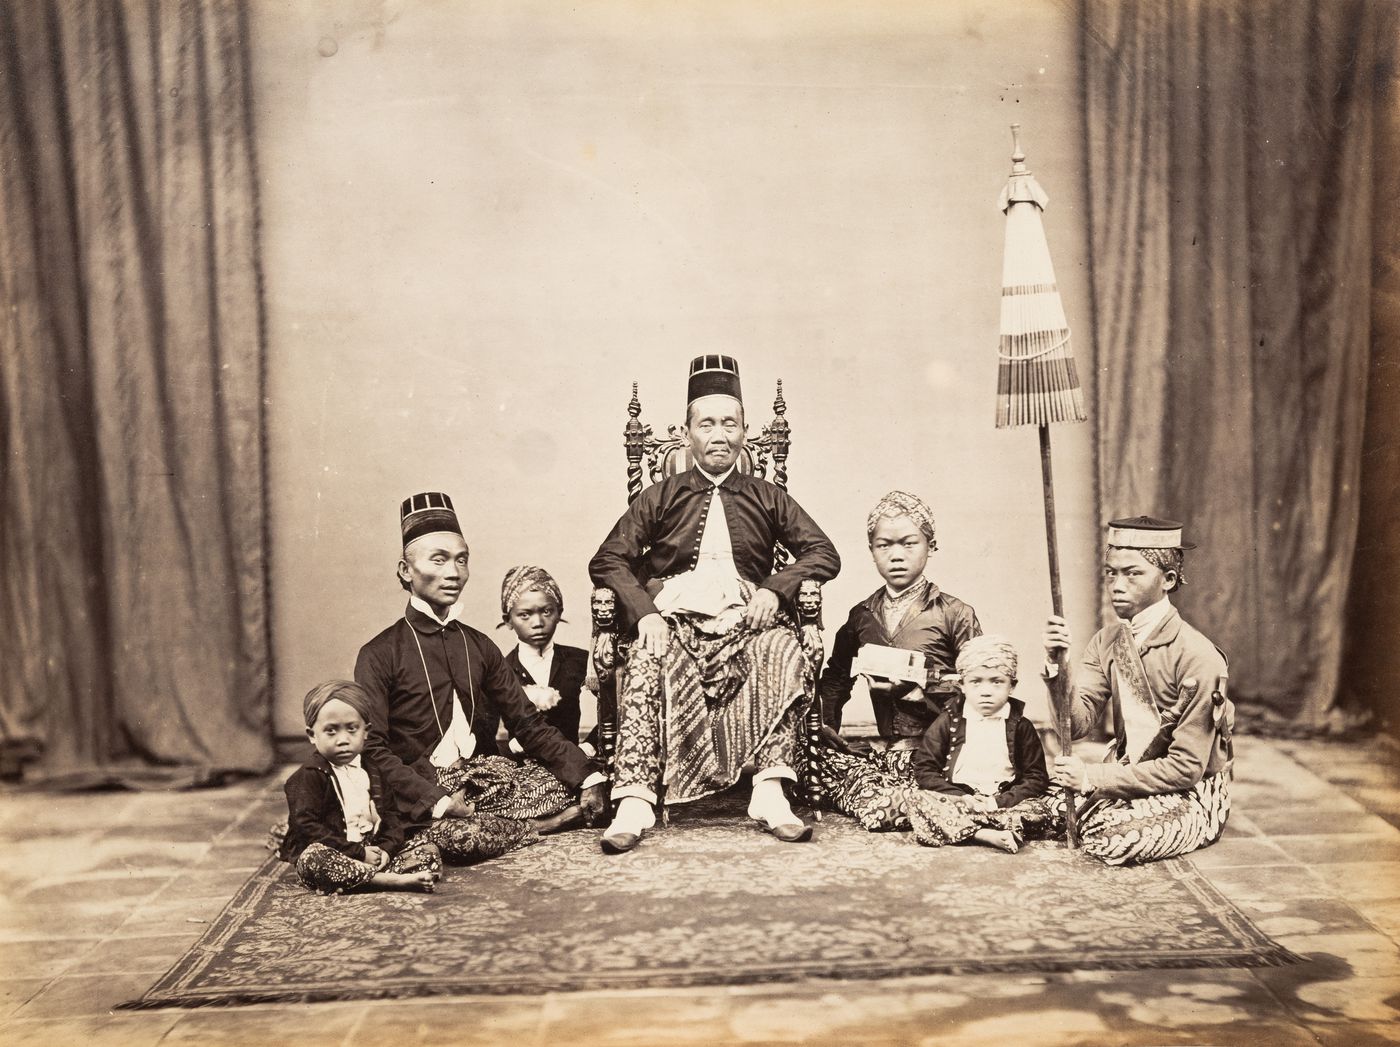 Portrait of the King of Semarang and his royal entourage, Indonesia